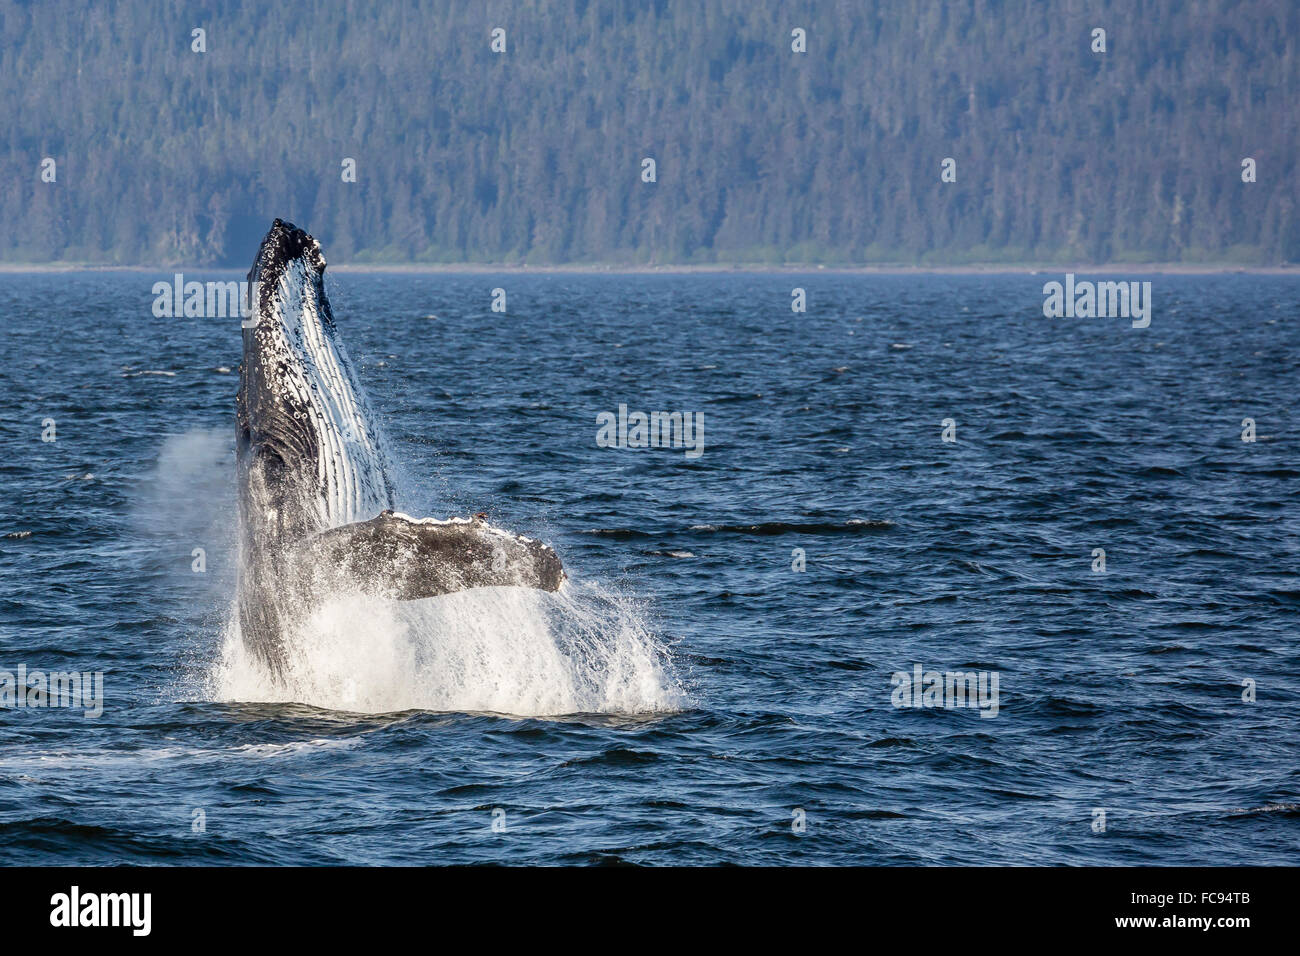 Mother humpback whale (Megaptera novaeangliae) breaching in Icy Strait, southeast Alaska, United States of America Stock Photo